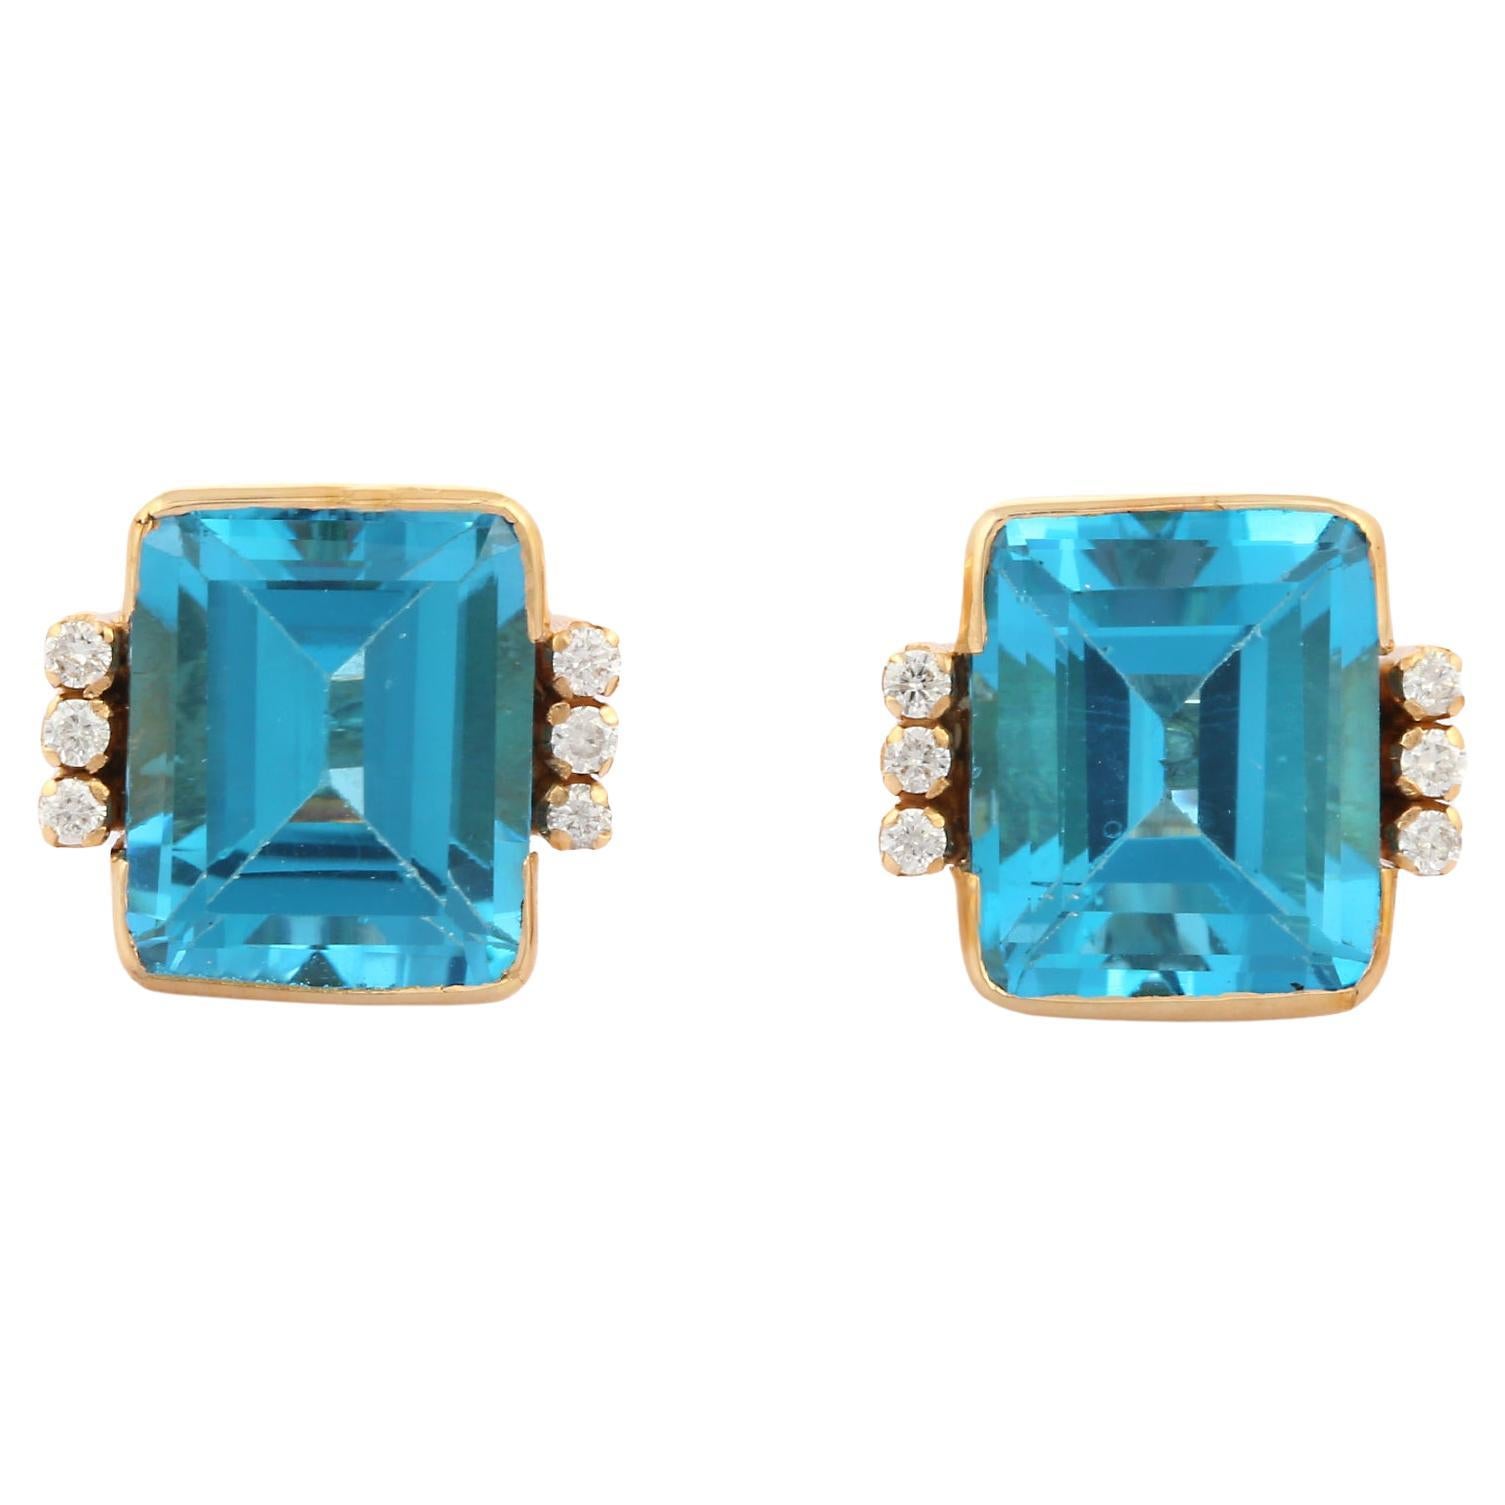 Genuine Blue Topaz 15.15 Ct Stud Earrings with Diamonds in 18K Yellow Gold